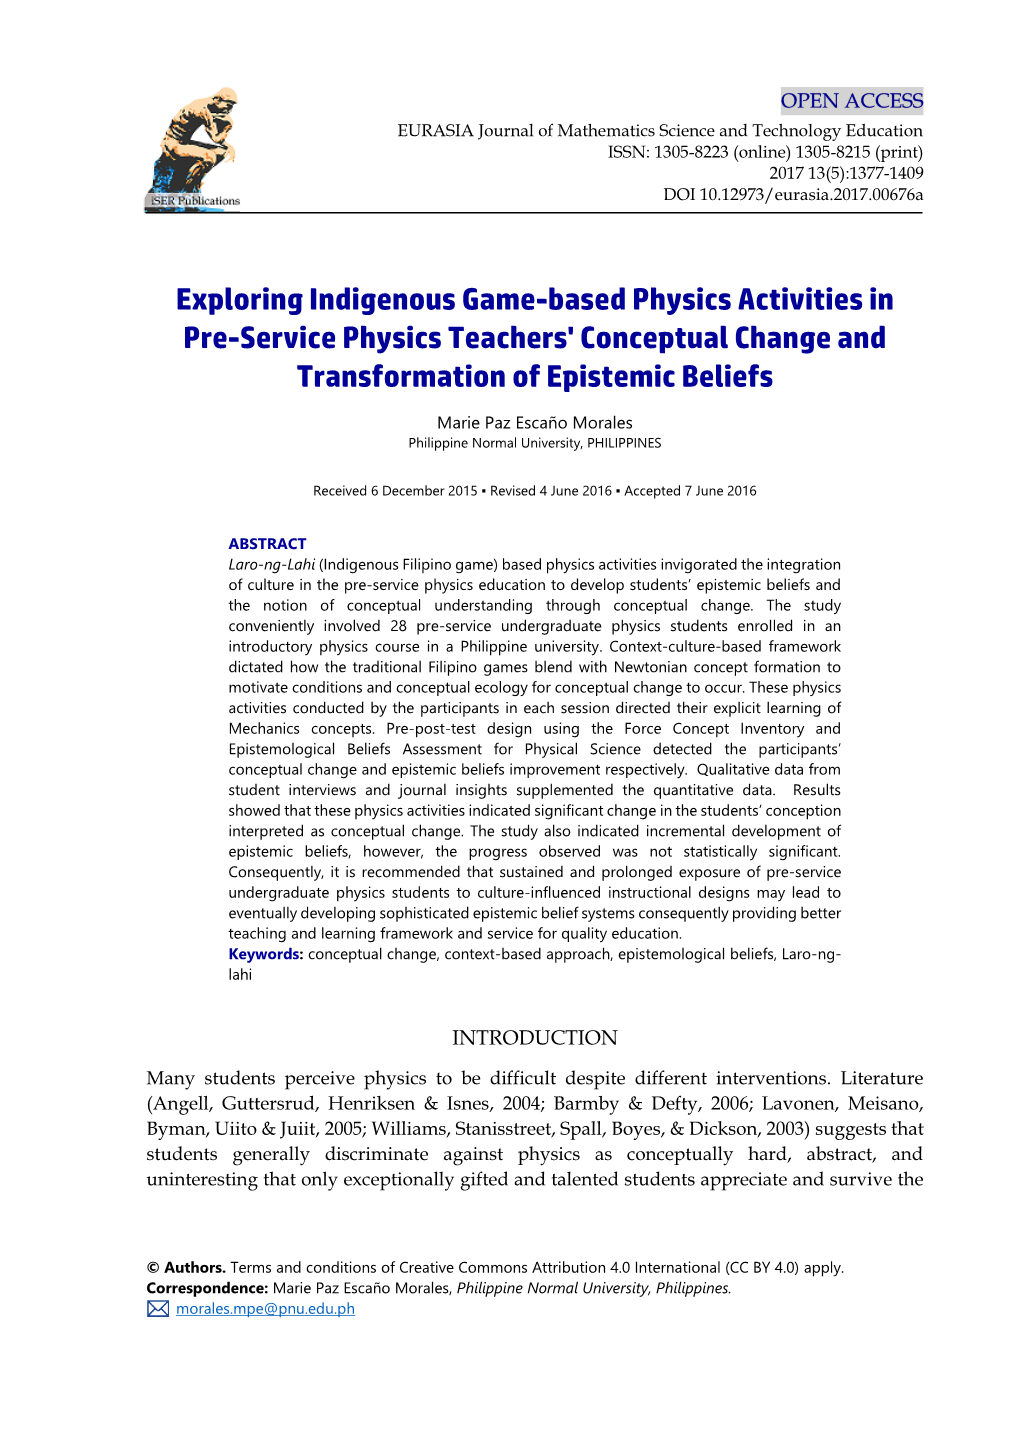 Exploring Indigenous Game-Based Physics Activities in Pre-Service Physics Teachers' Conceptual Change and Transformation of Epistemic Beliefs